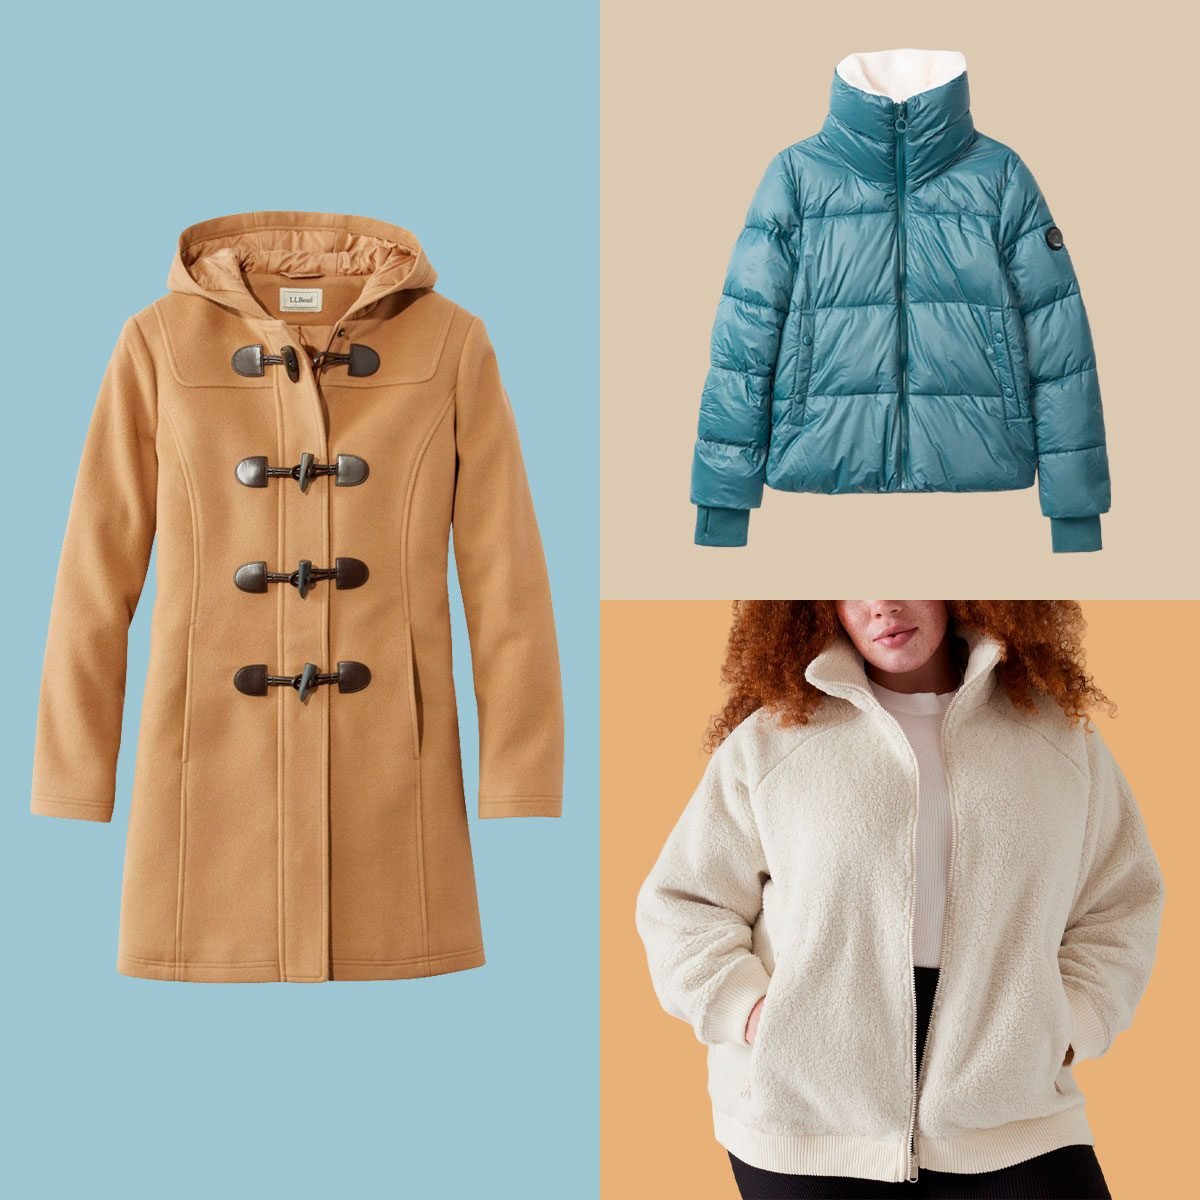 How to Stay Warm and Chic With the Best Winter Coats for Women